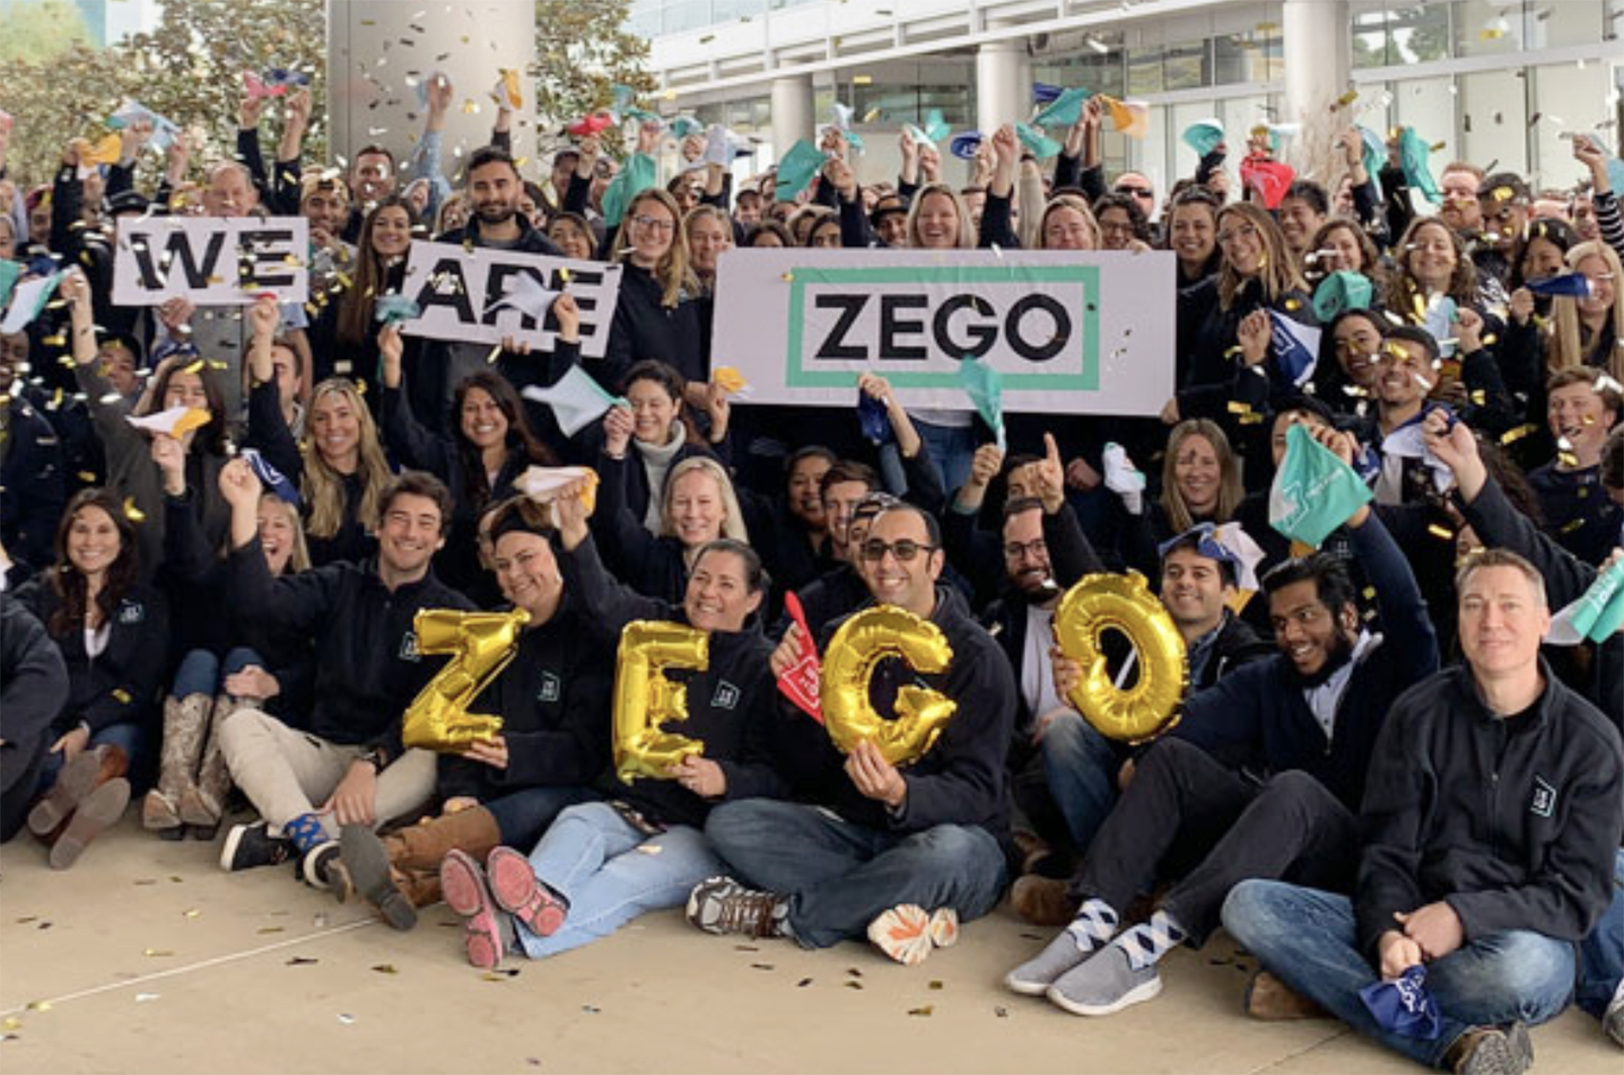 Nine months after KC startup’s exit, its new owner adopts ‘Zego’ name, identity